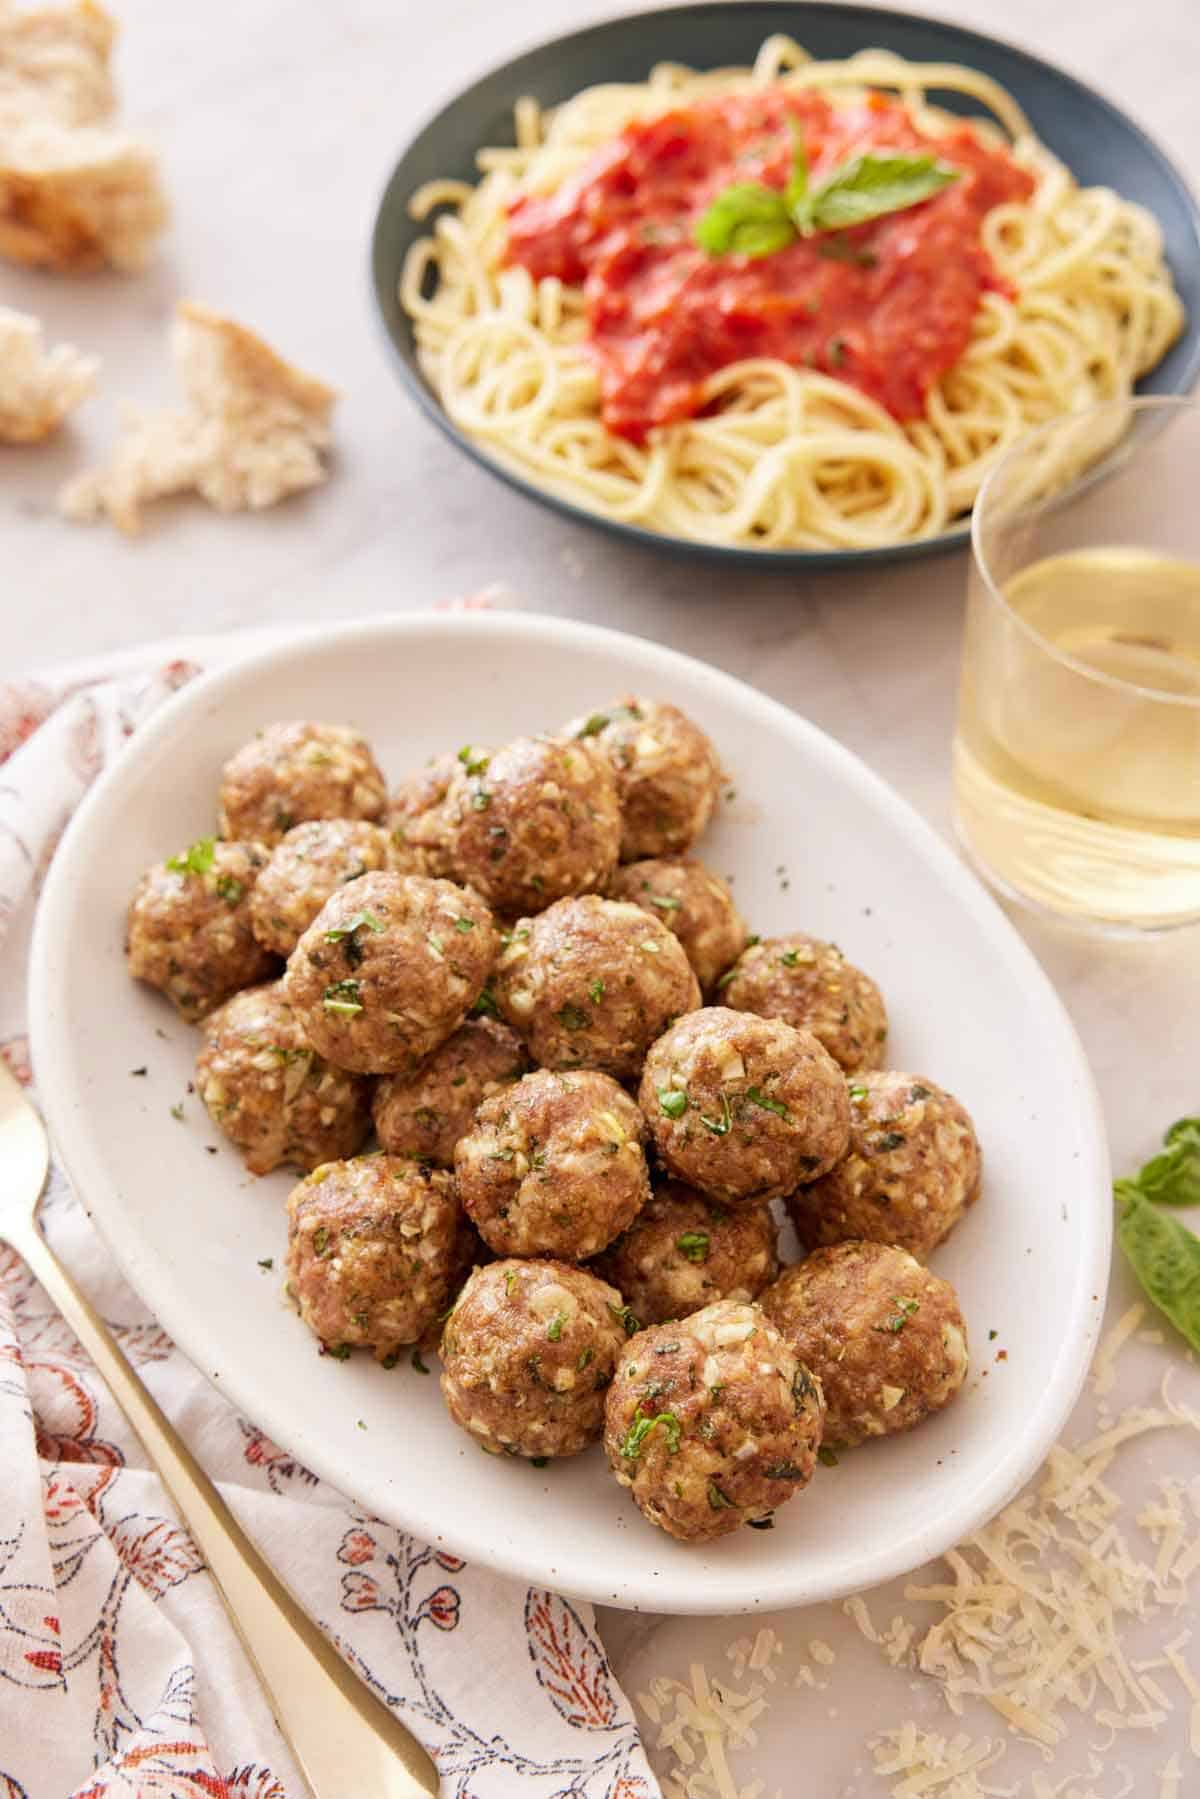 A platter of turkey meatballs with a glass of wine and a plate of noodles with sauce in the background.